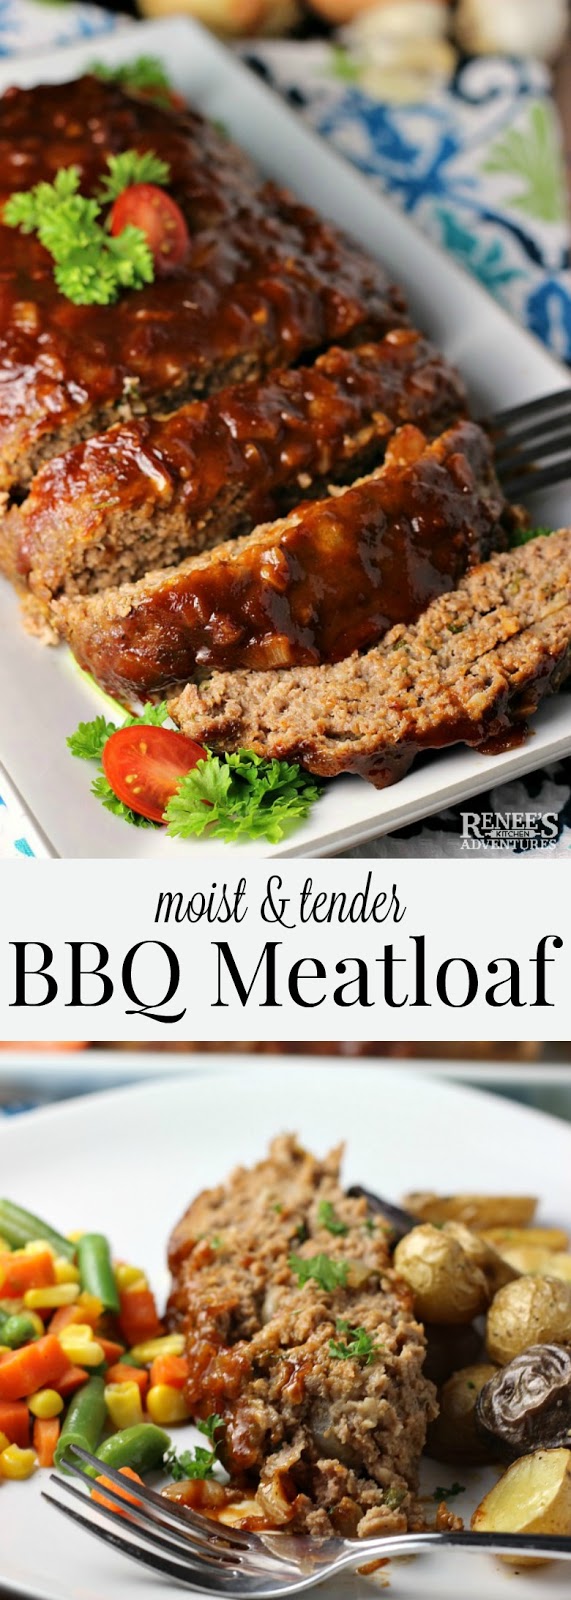 Best BBQ Meatloaf | Renee's Kitchen Adventures - easy recipe for BBQ meatloaf made with ground beef. Great choice for weeknight dinners or Sunday suppers! Baked in the oven for a meal the whole family will enjoy! Makes great meatloaf sandwiches the next day!